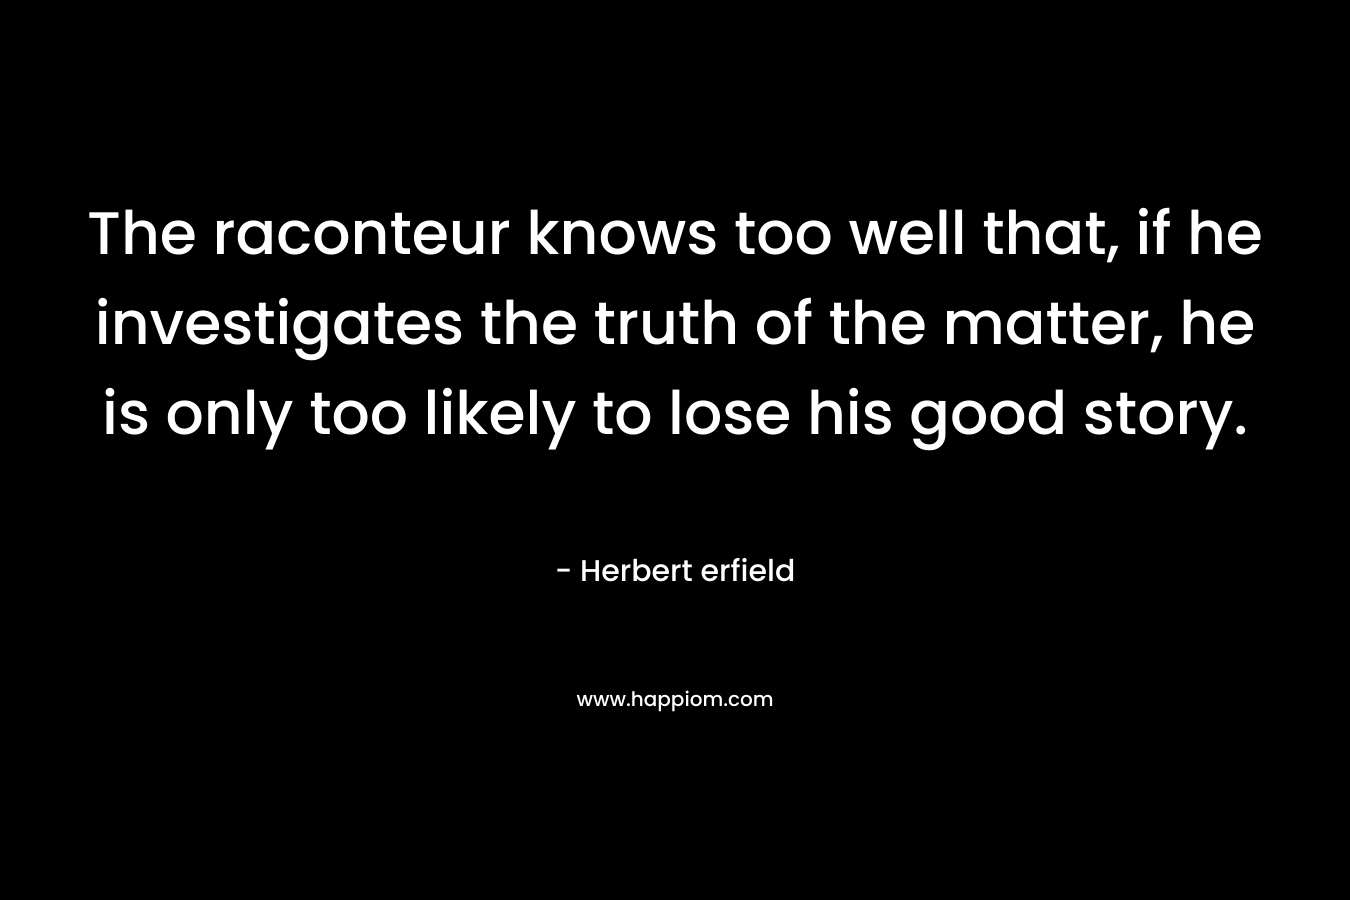 The raconteur knows too well that, if he investigates the truth of the matter, he is only too likely to lose his good story. – Herbert erfield